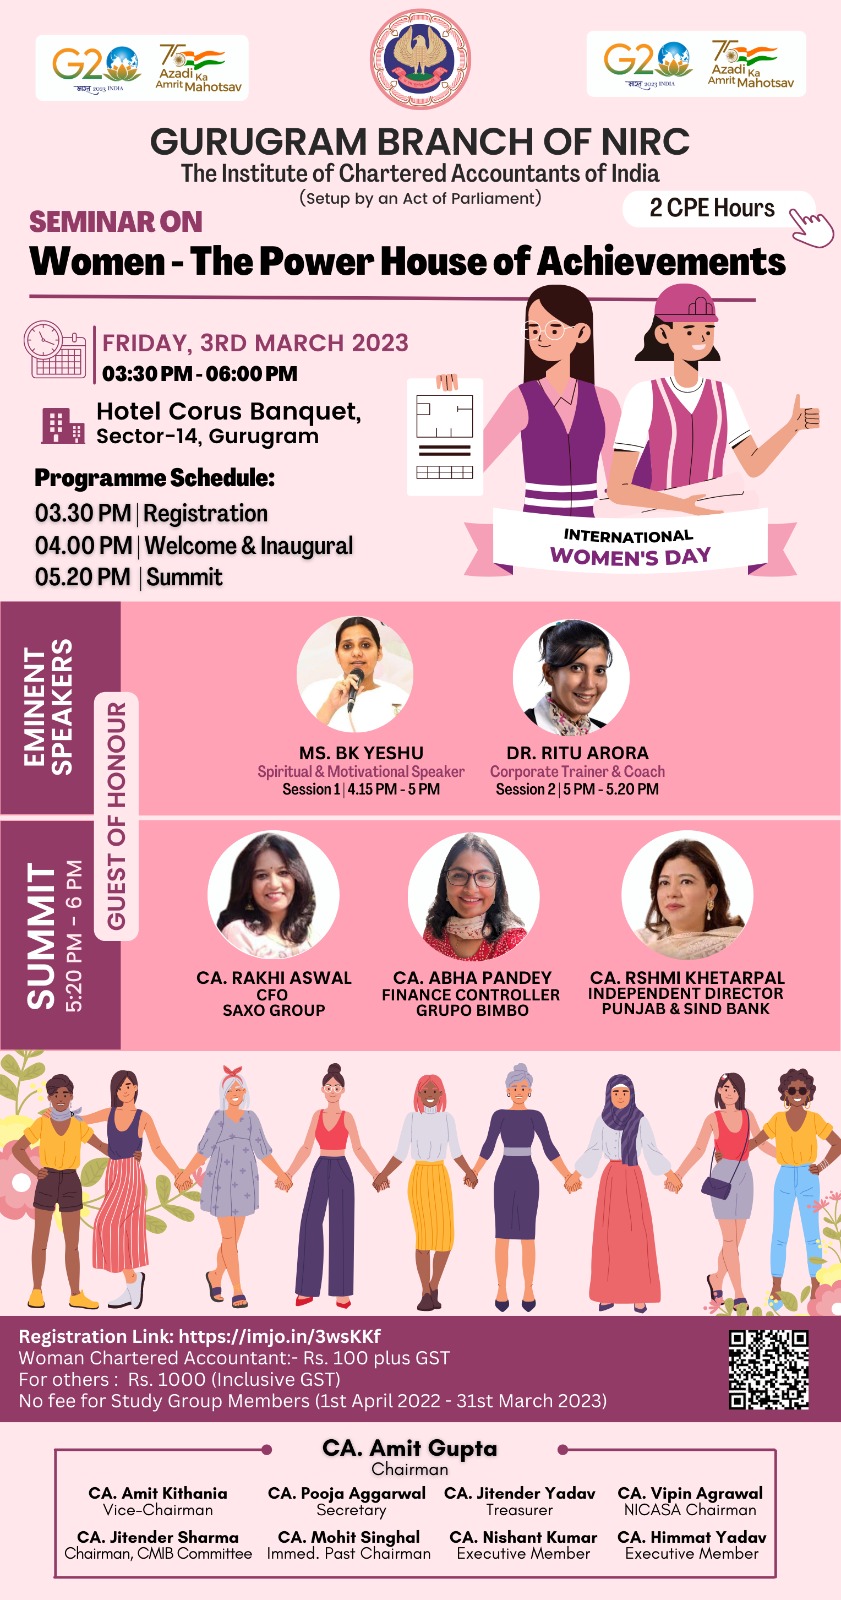 Seminar on Women - The Power House of Achievements